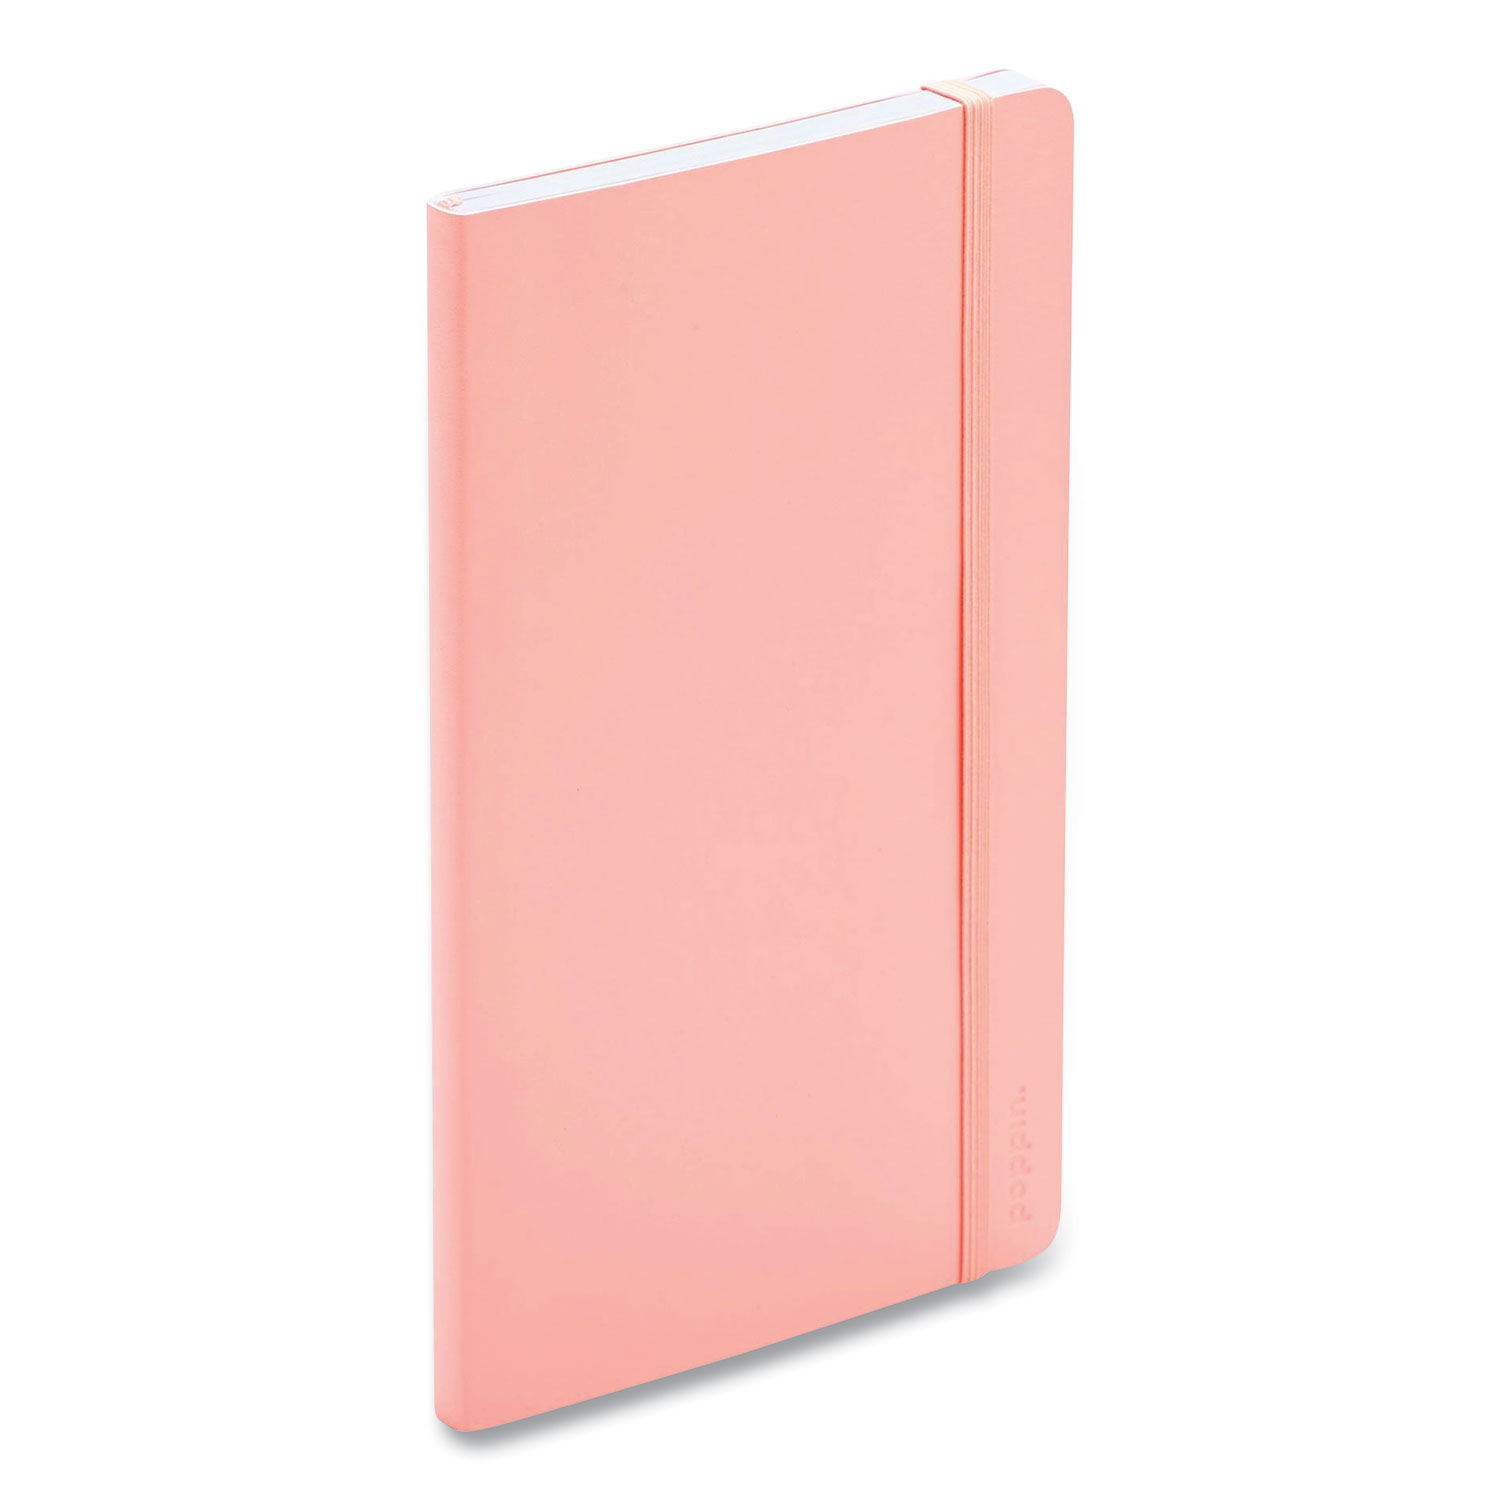 Poppin Medium Softcover Notebook, 8.25 x 5, Blush, 192 Sheets